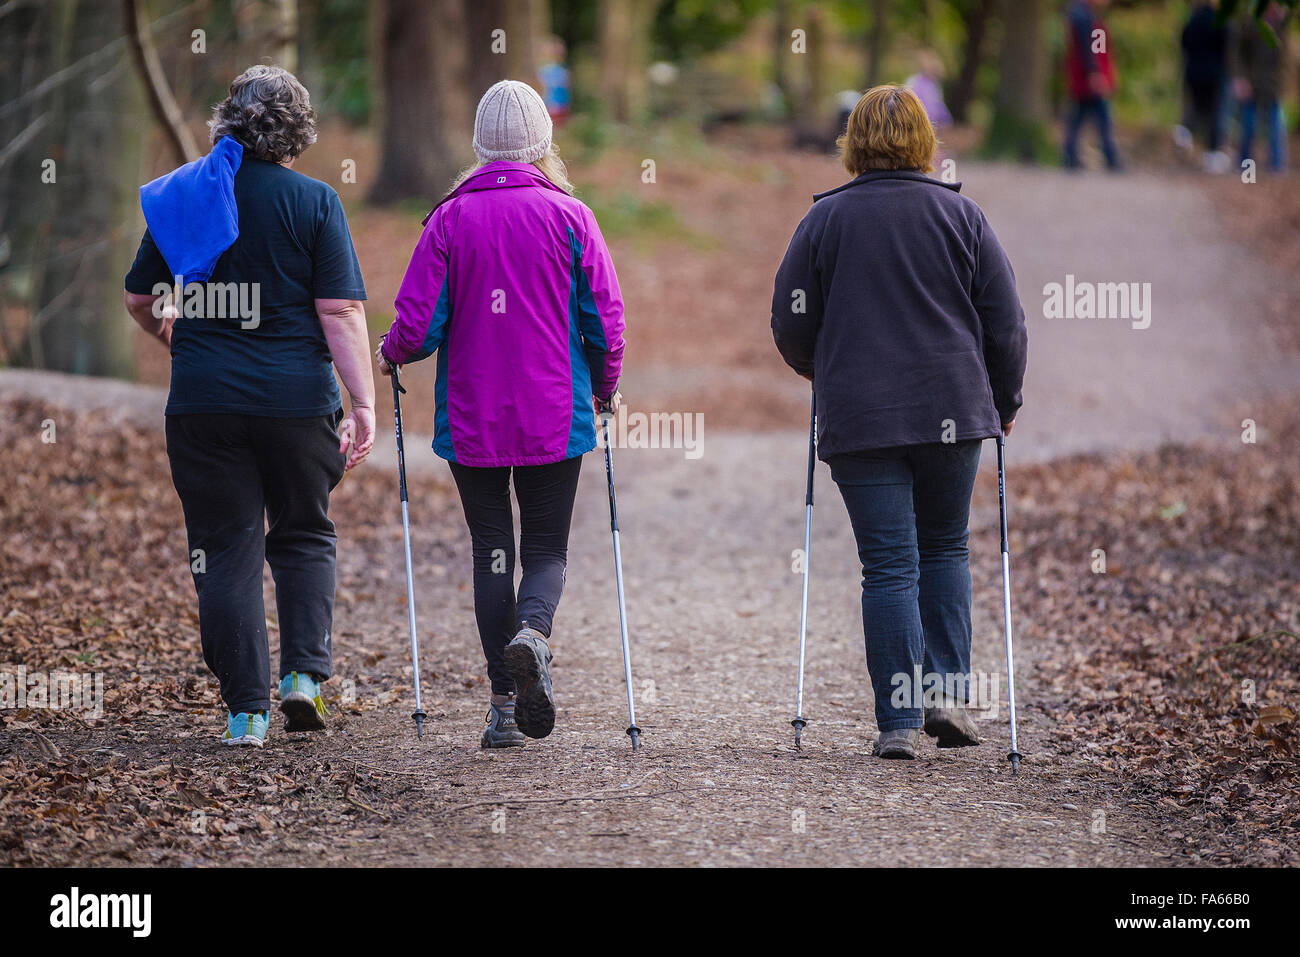 Walkers using trekking poles in Thorndon Park woodland in Essex, England, United Kingdom. Stock Photo